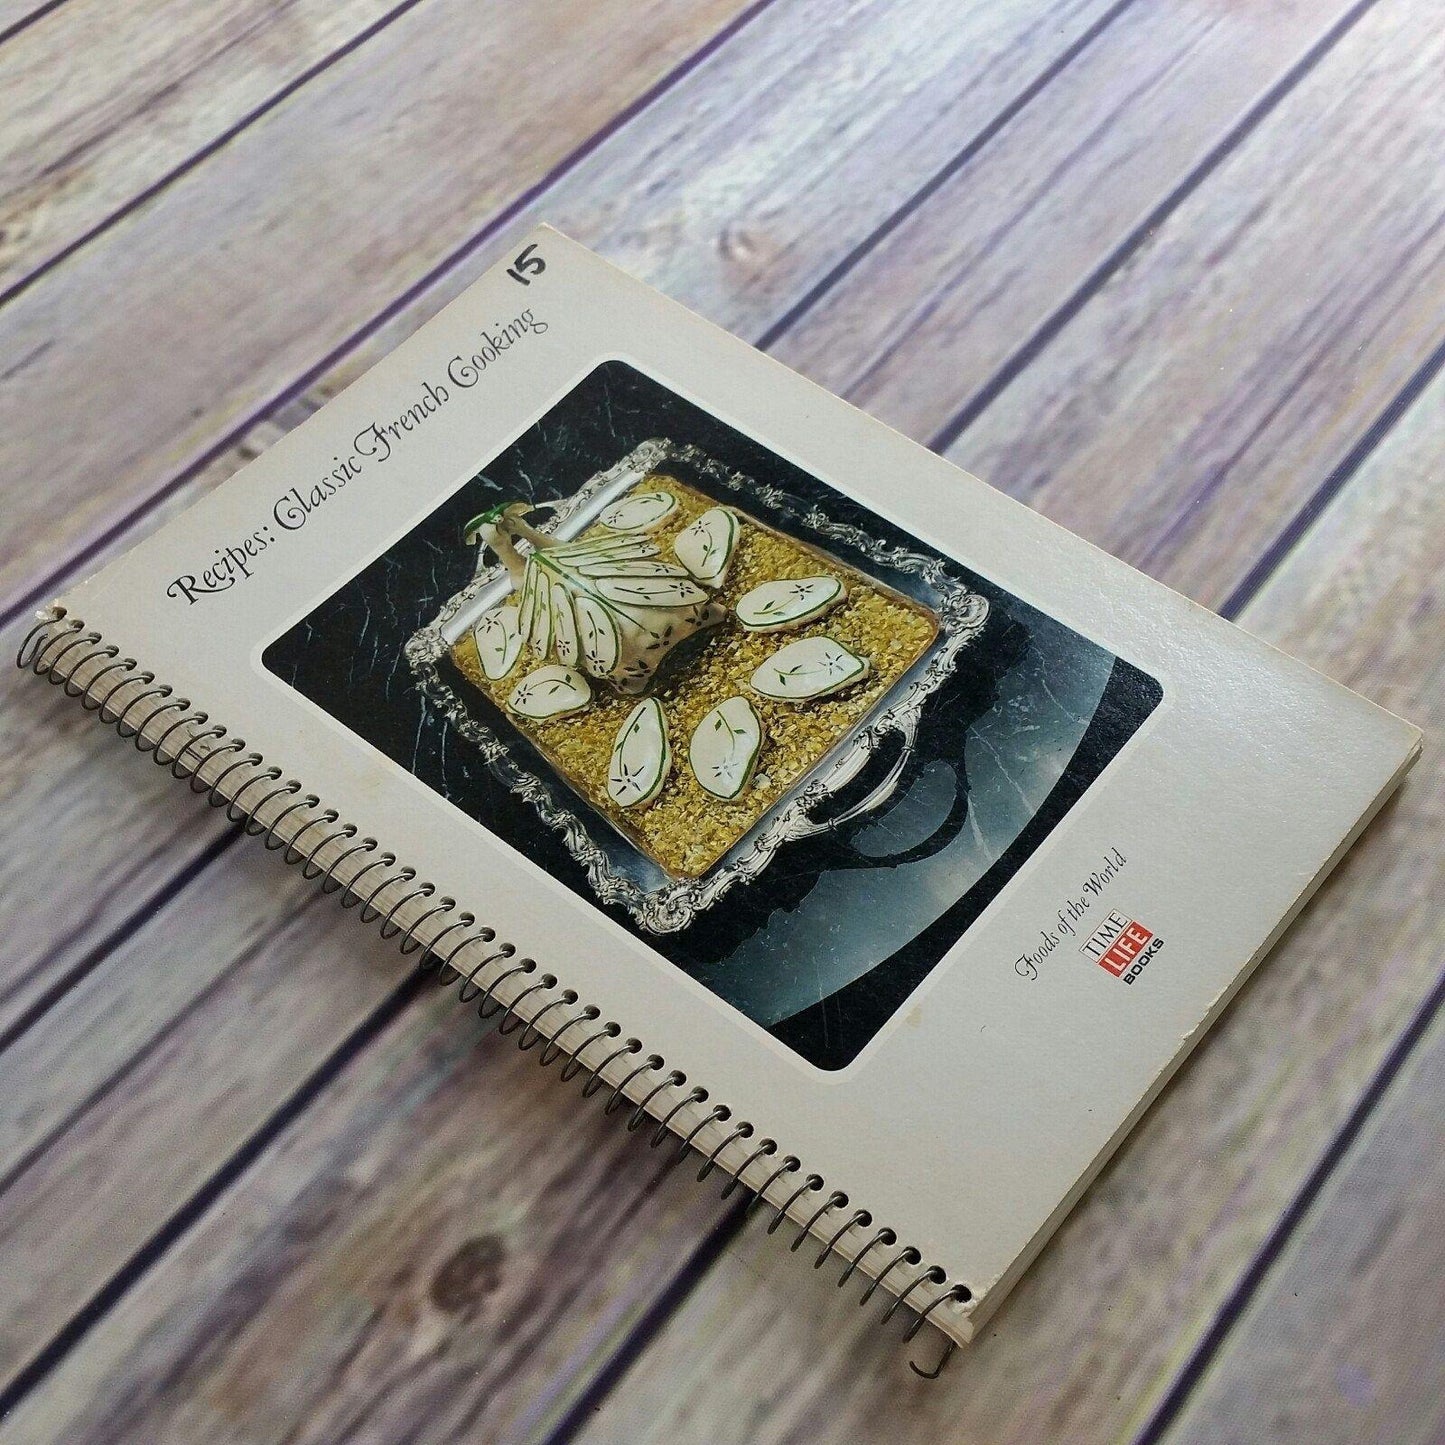 Vtg French Cookbook Recipes Classic French CookingTime Life Books Foods of the World 1970 Spiral Bound